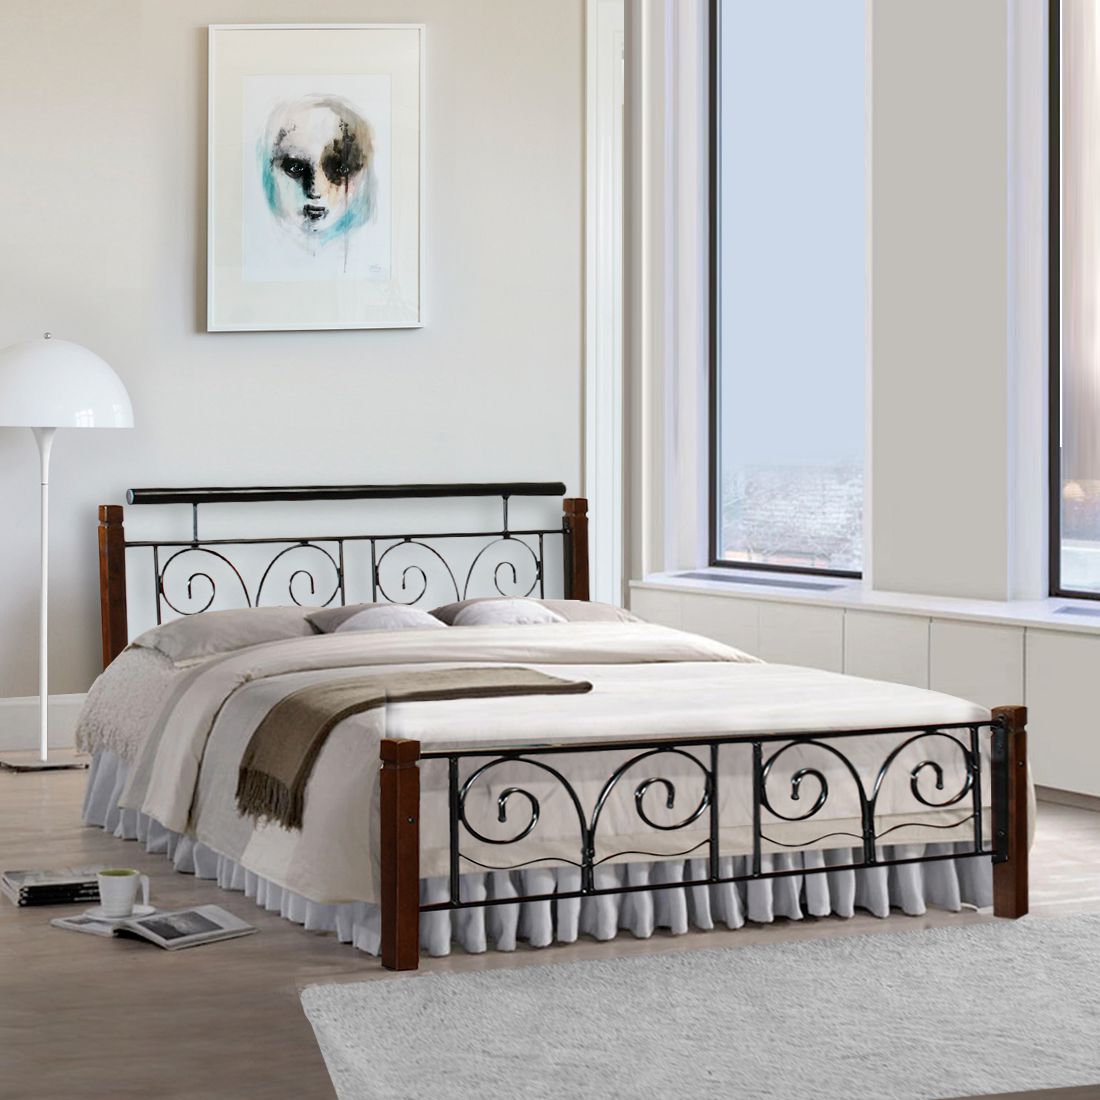 Furniturekraft Chicago Metal Queen Bed Buy Furniturekraft Chicago Metal Queen Bed Online At Best Prices In India On Snapdeal